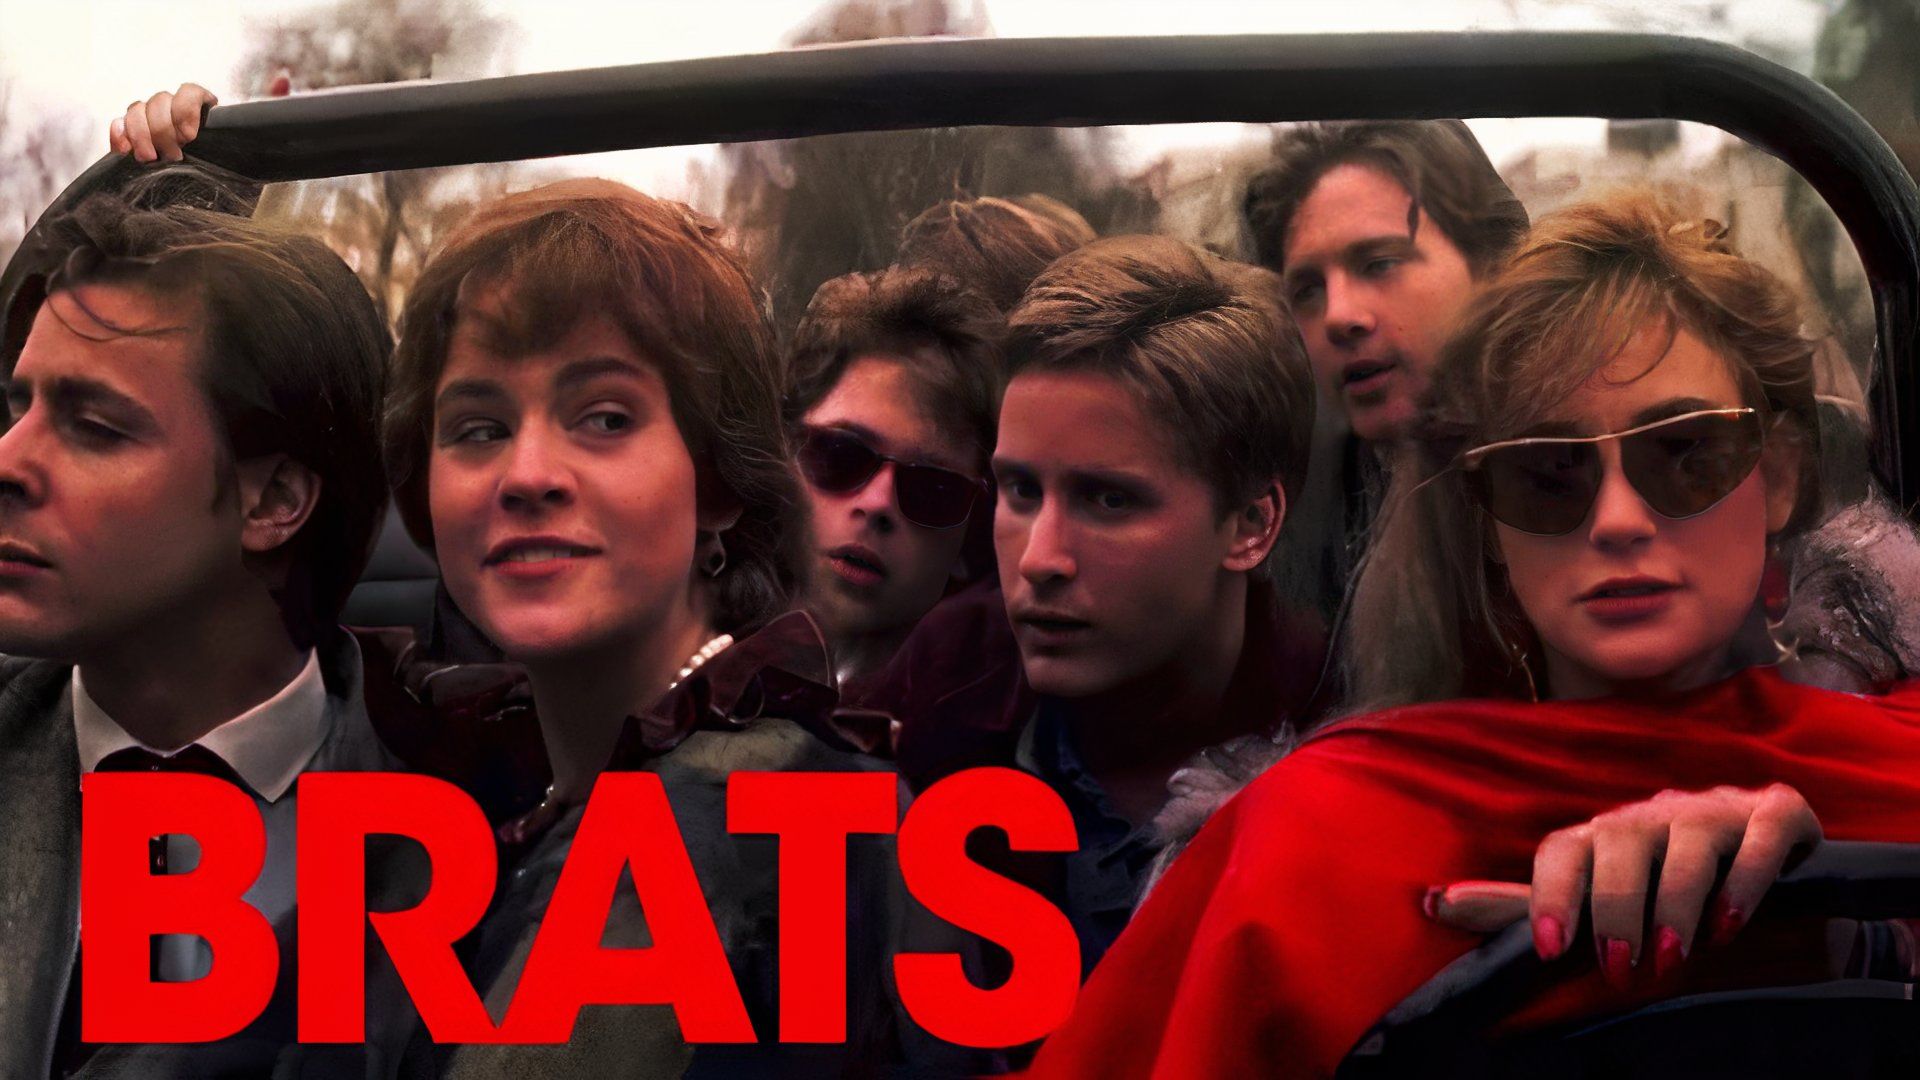 An Endearing Documentary that Unpacks The Brat Pack Label